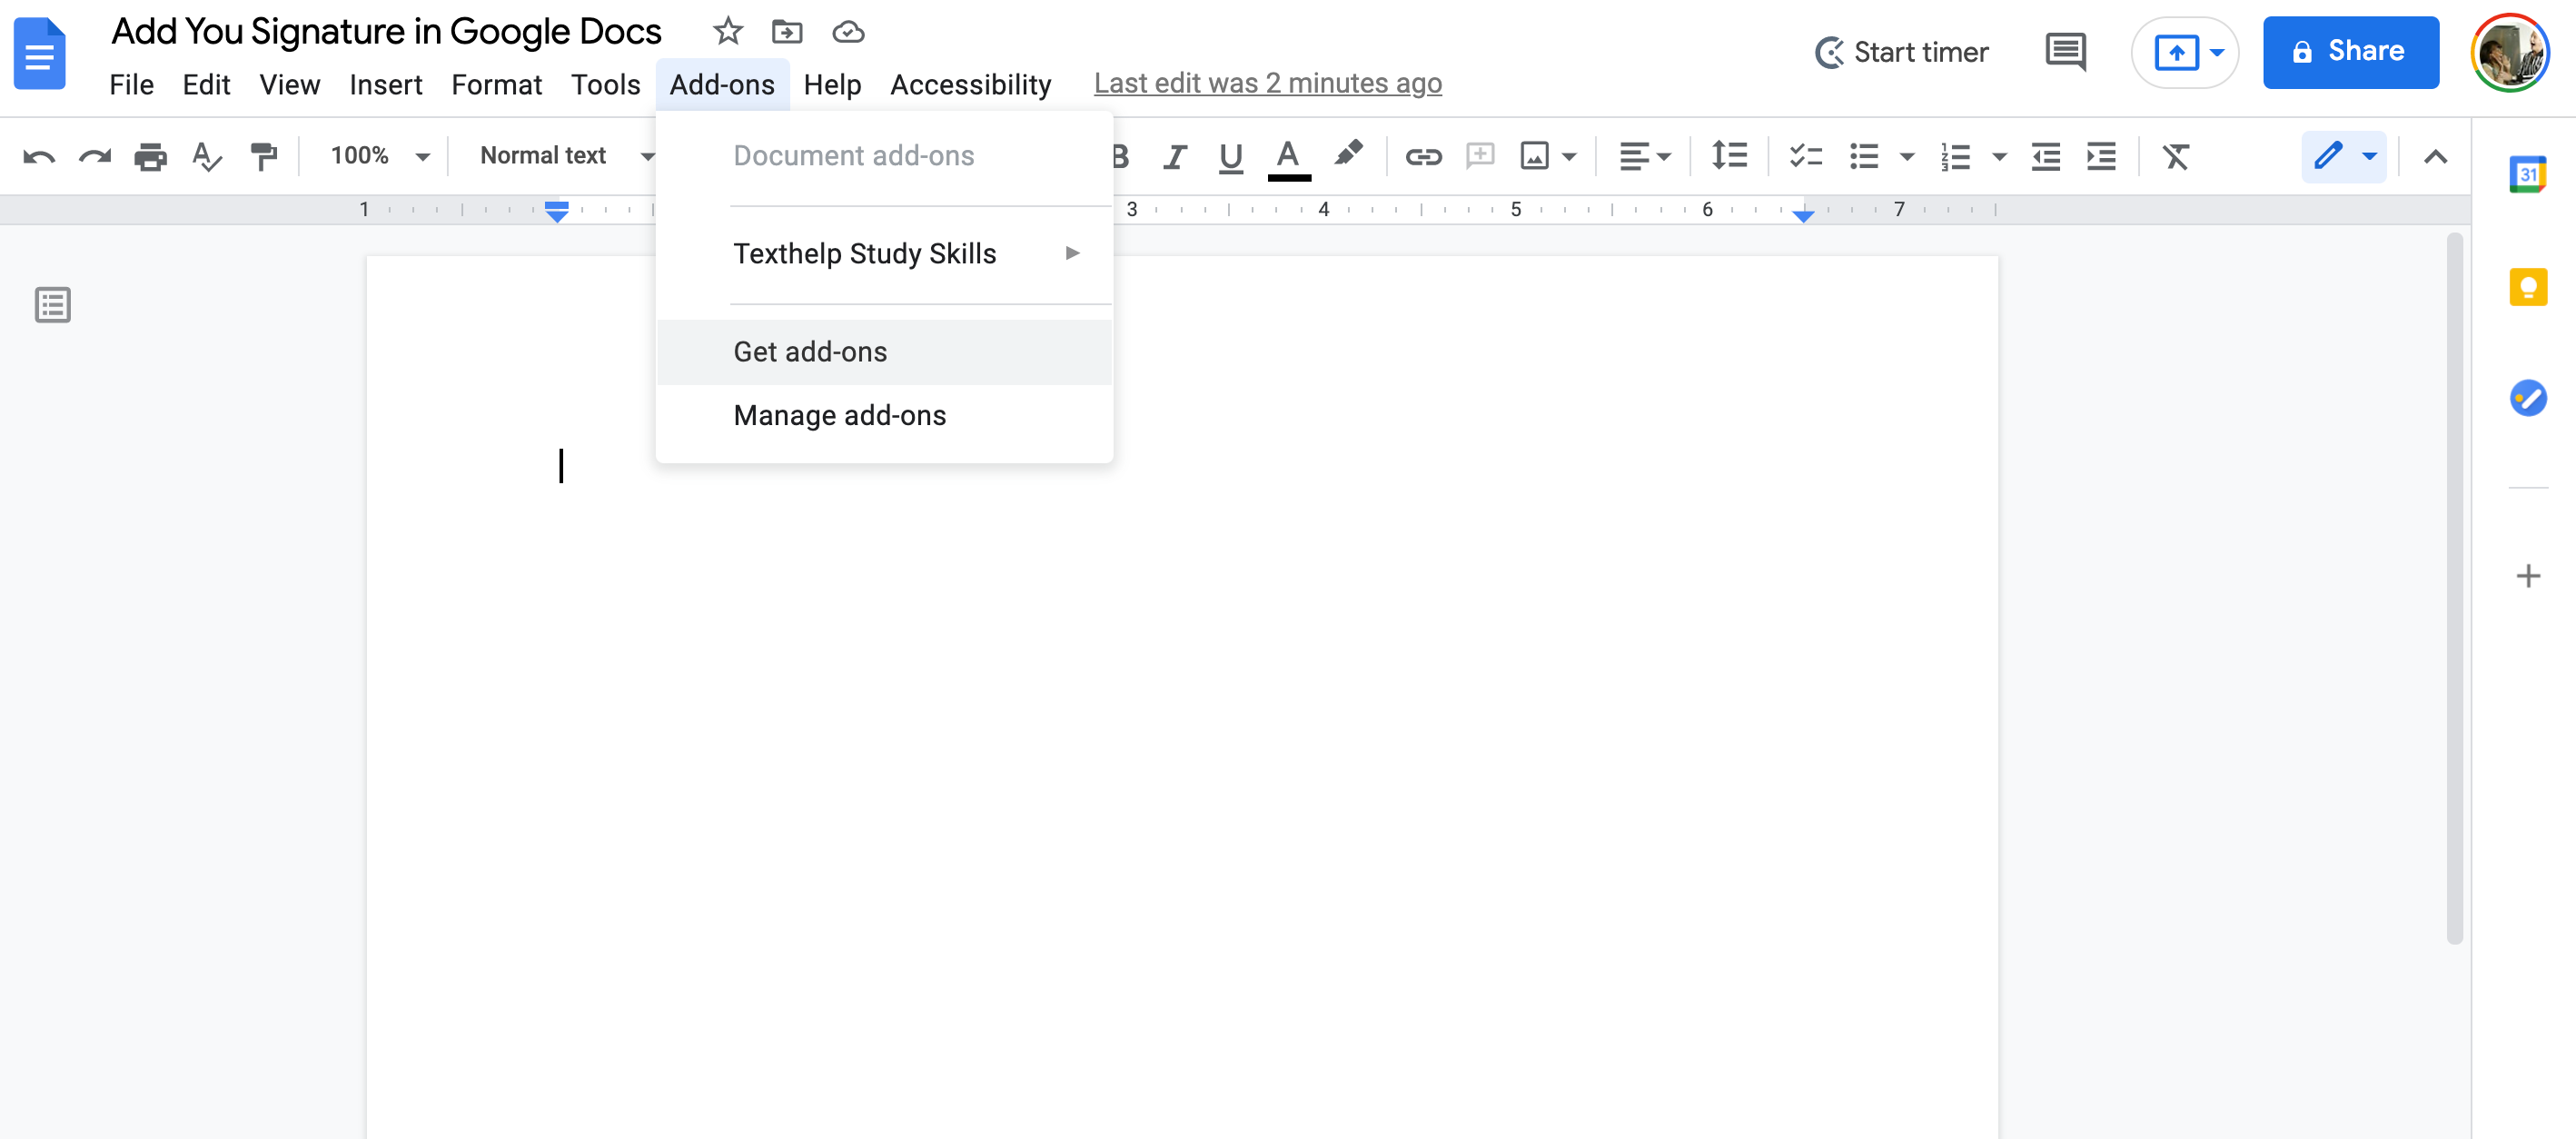 How to Add a Signature to Google Docs